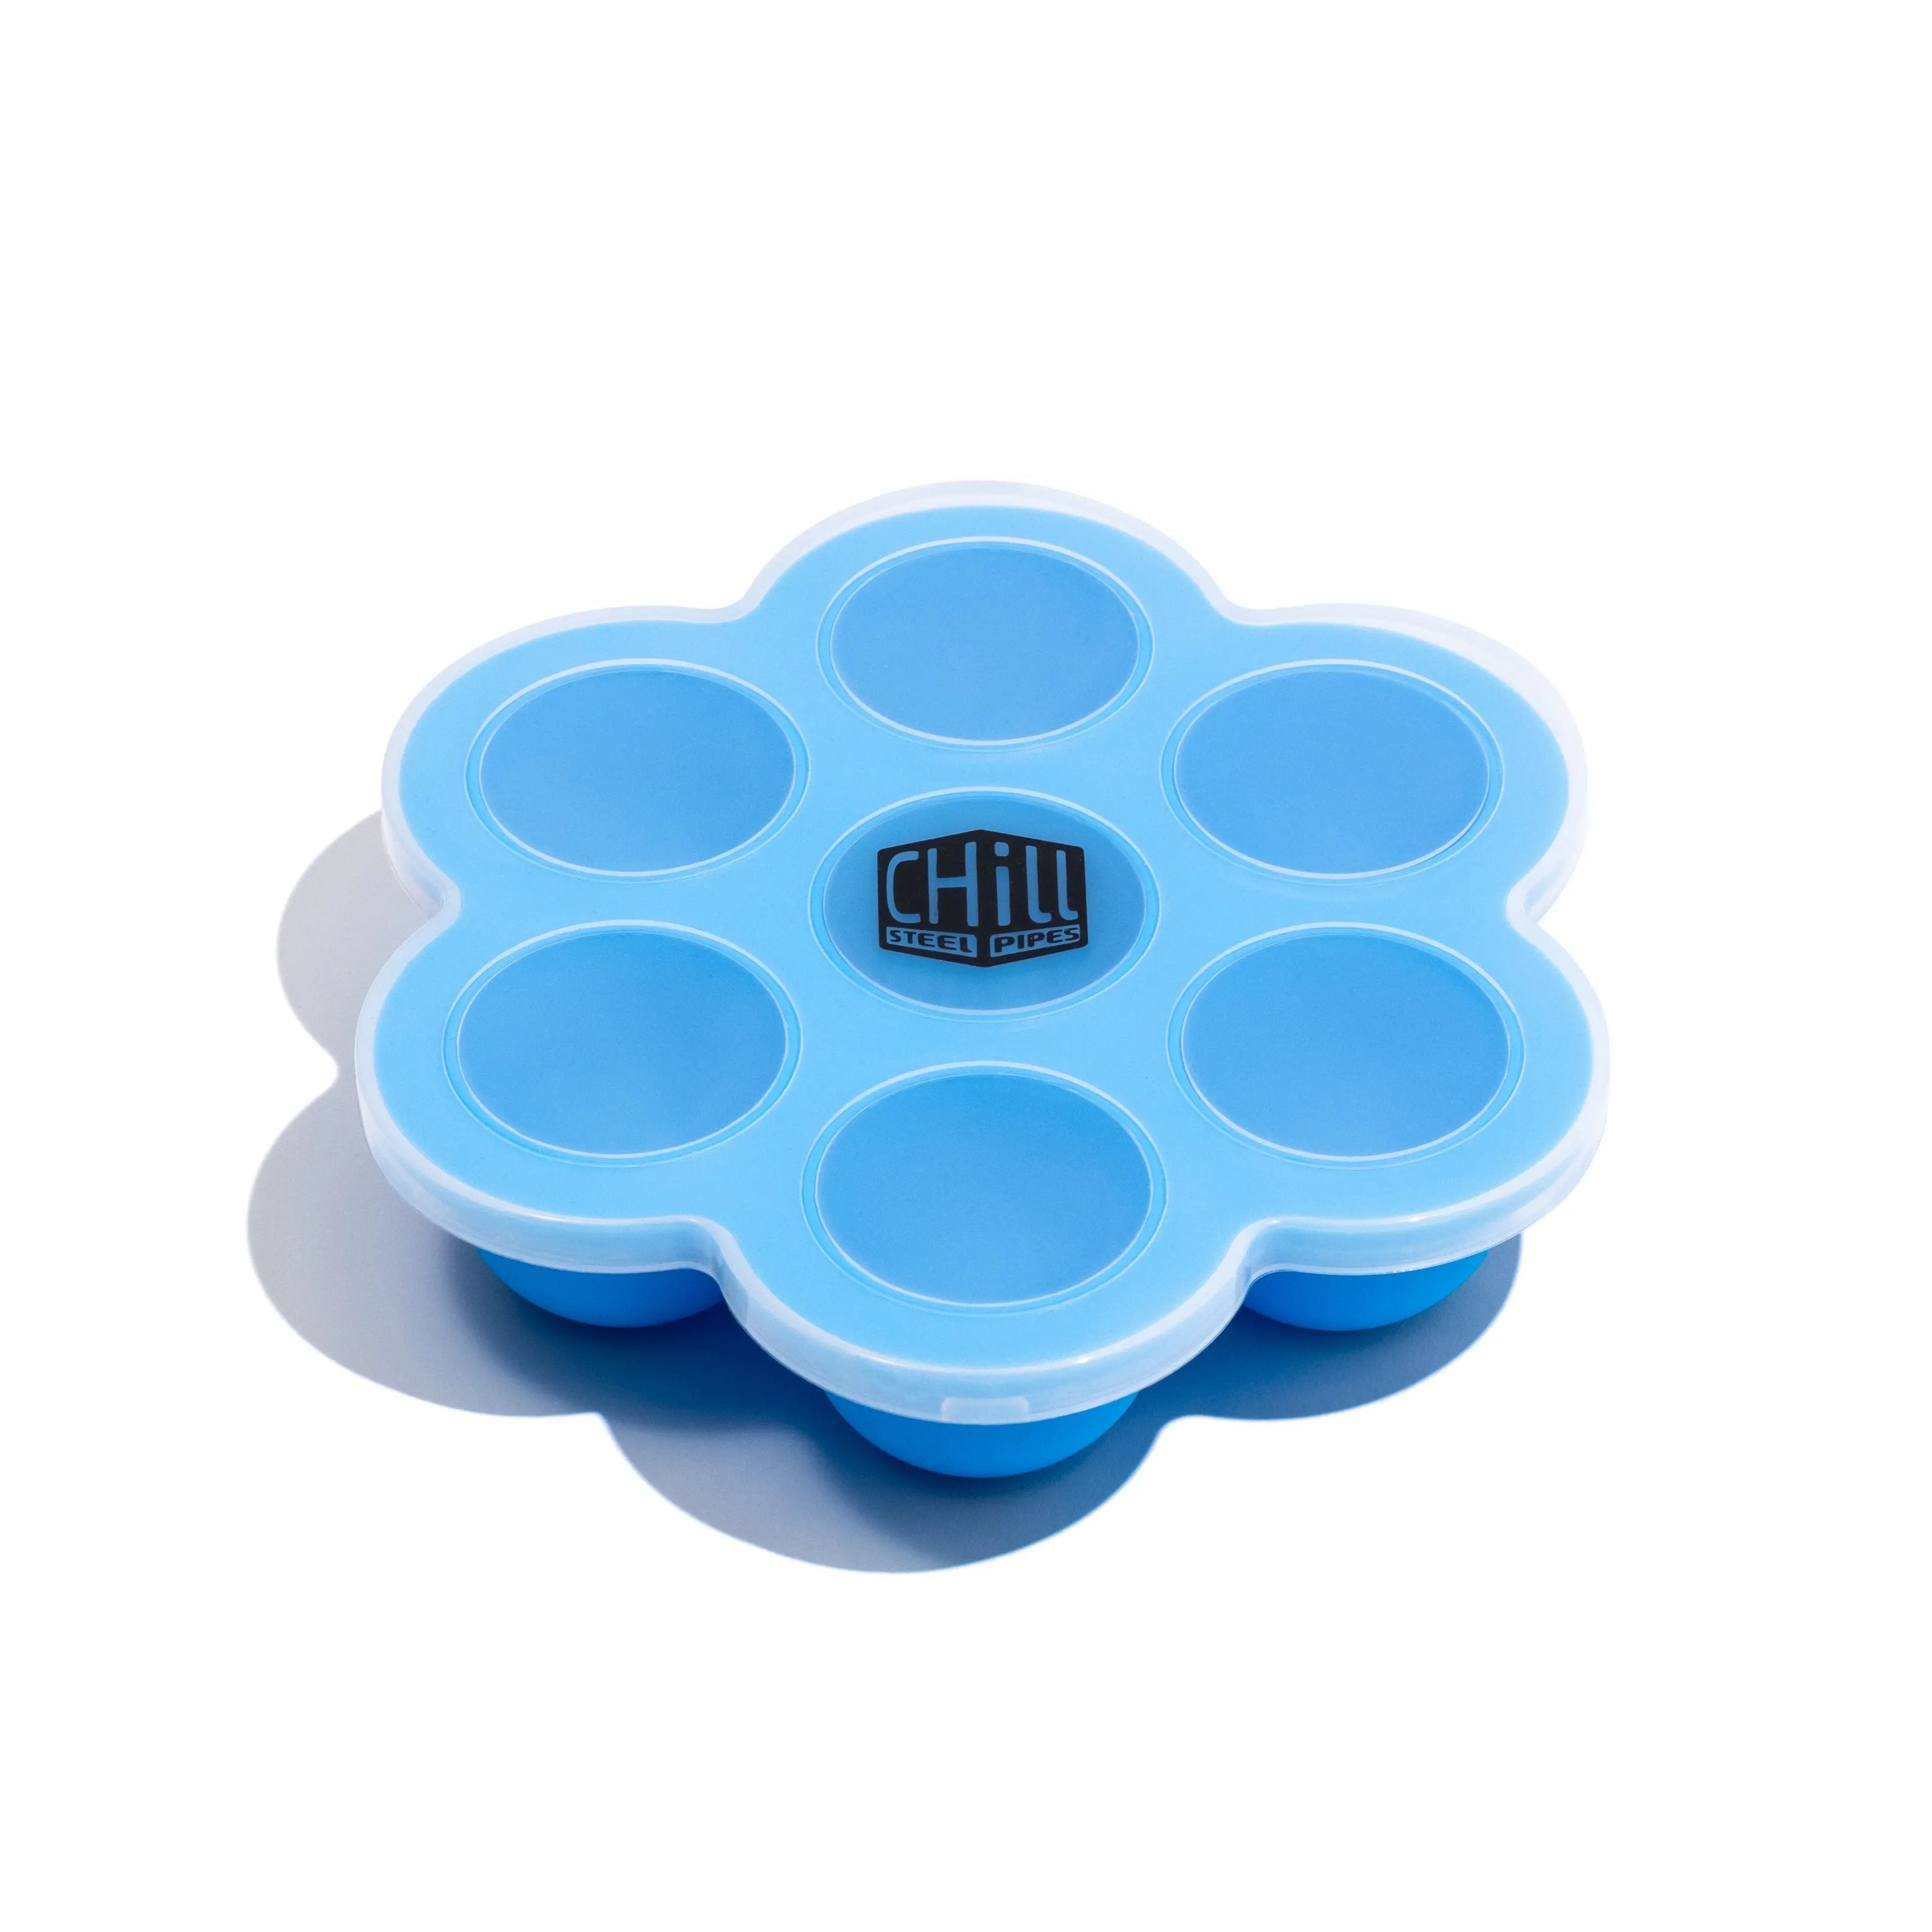 Chill - Extra Large Ice Cube Tray Set